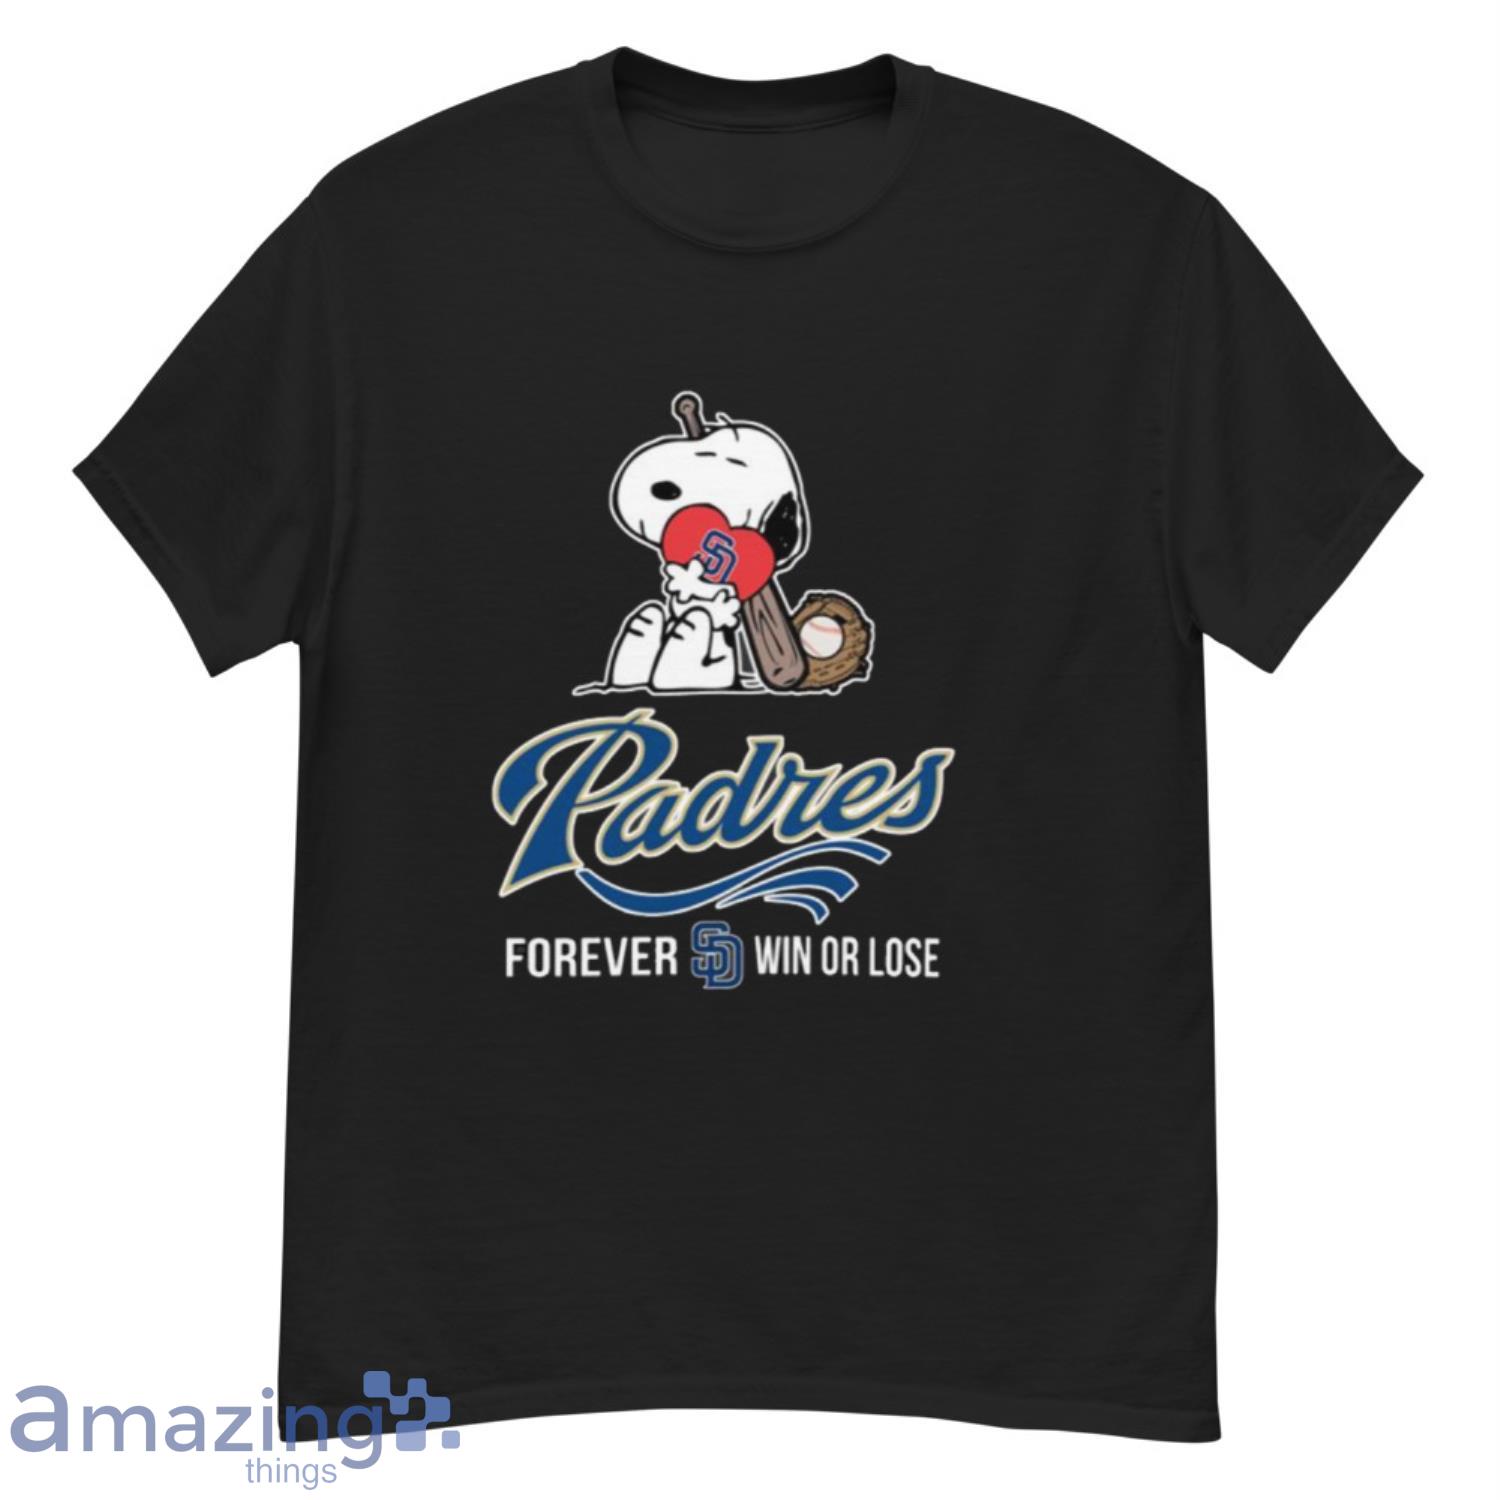 MLB The Peanuts Movie Snoopy Forever Win Or Lose Baseball